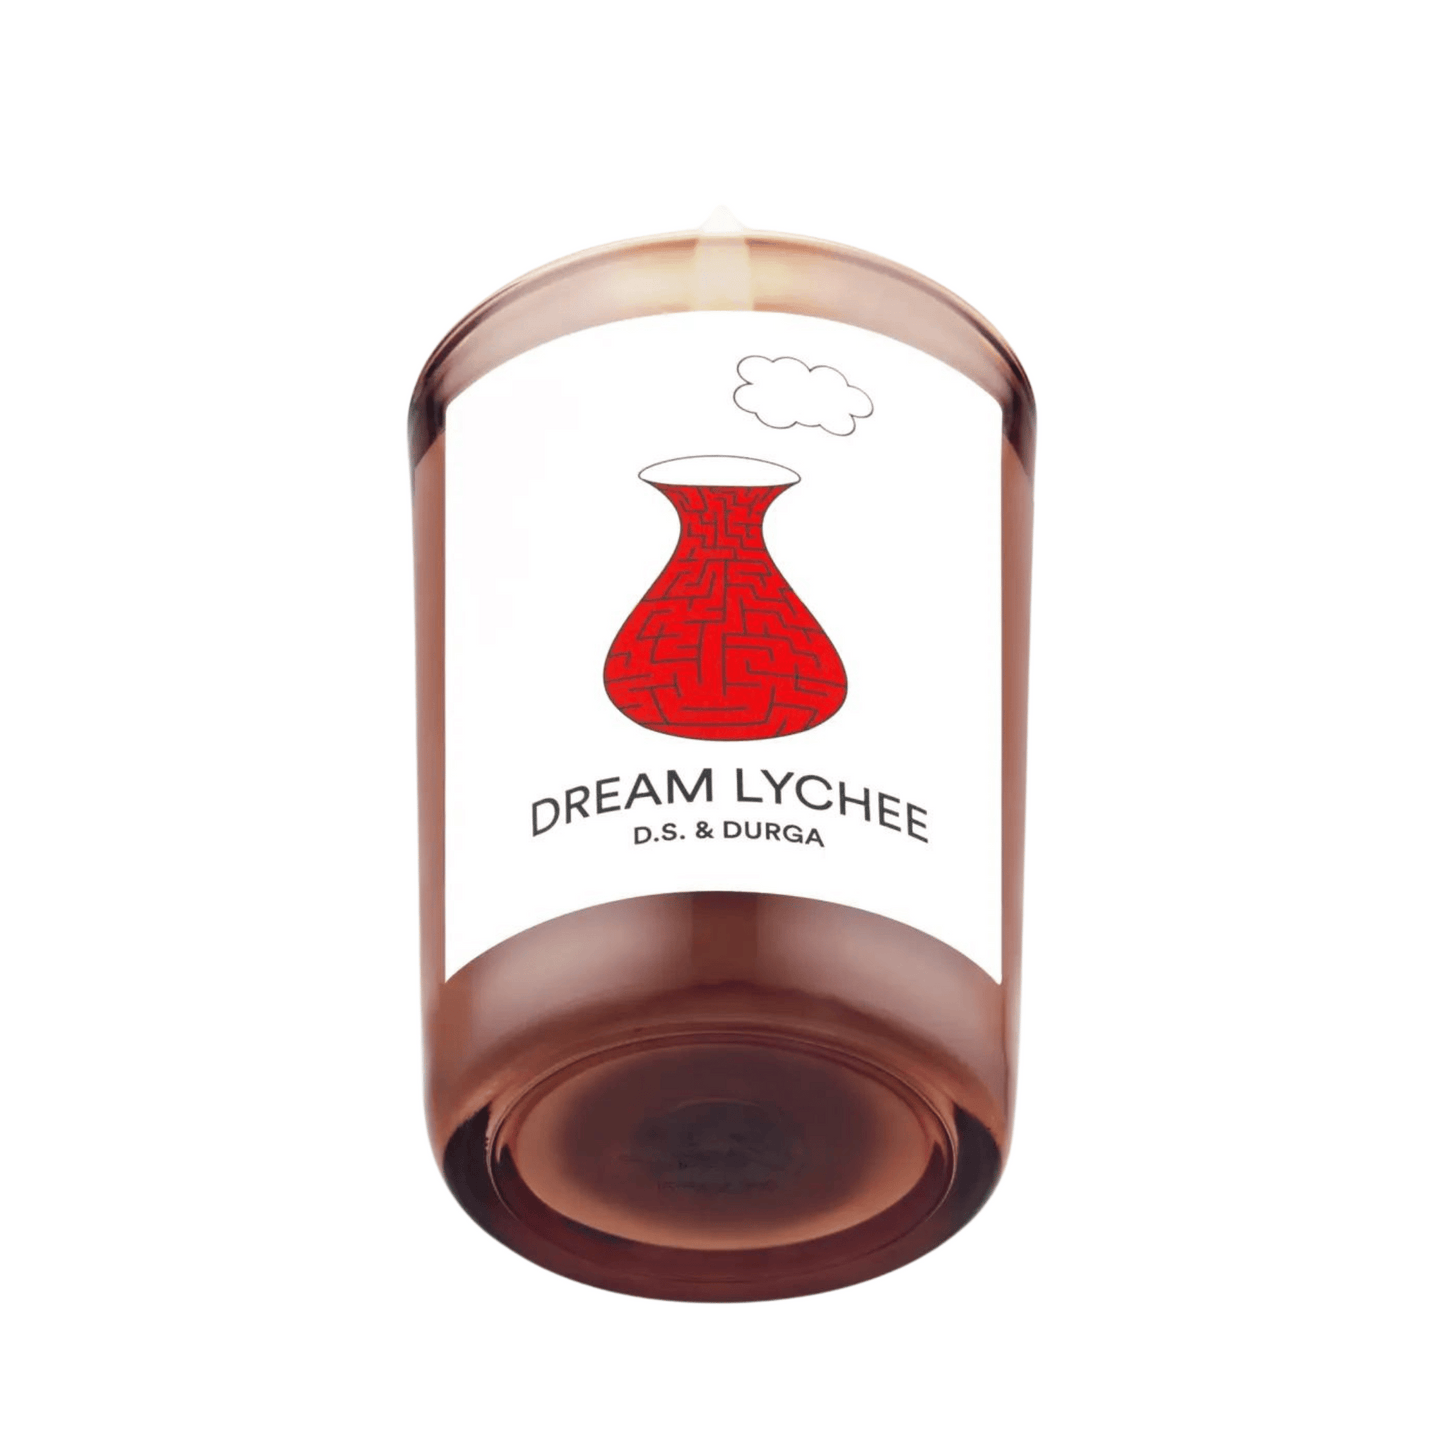 Primary Image of Dream Lychee Candle